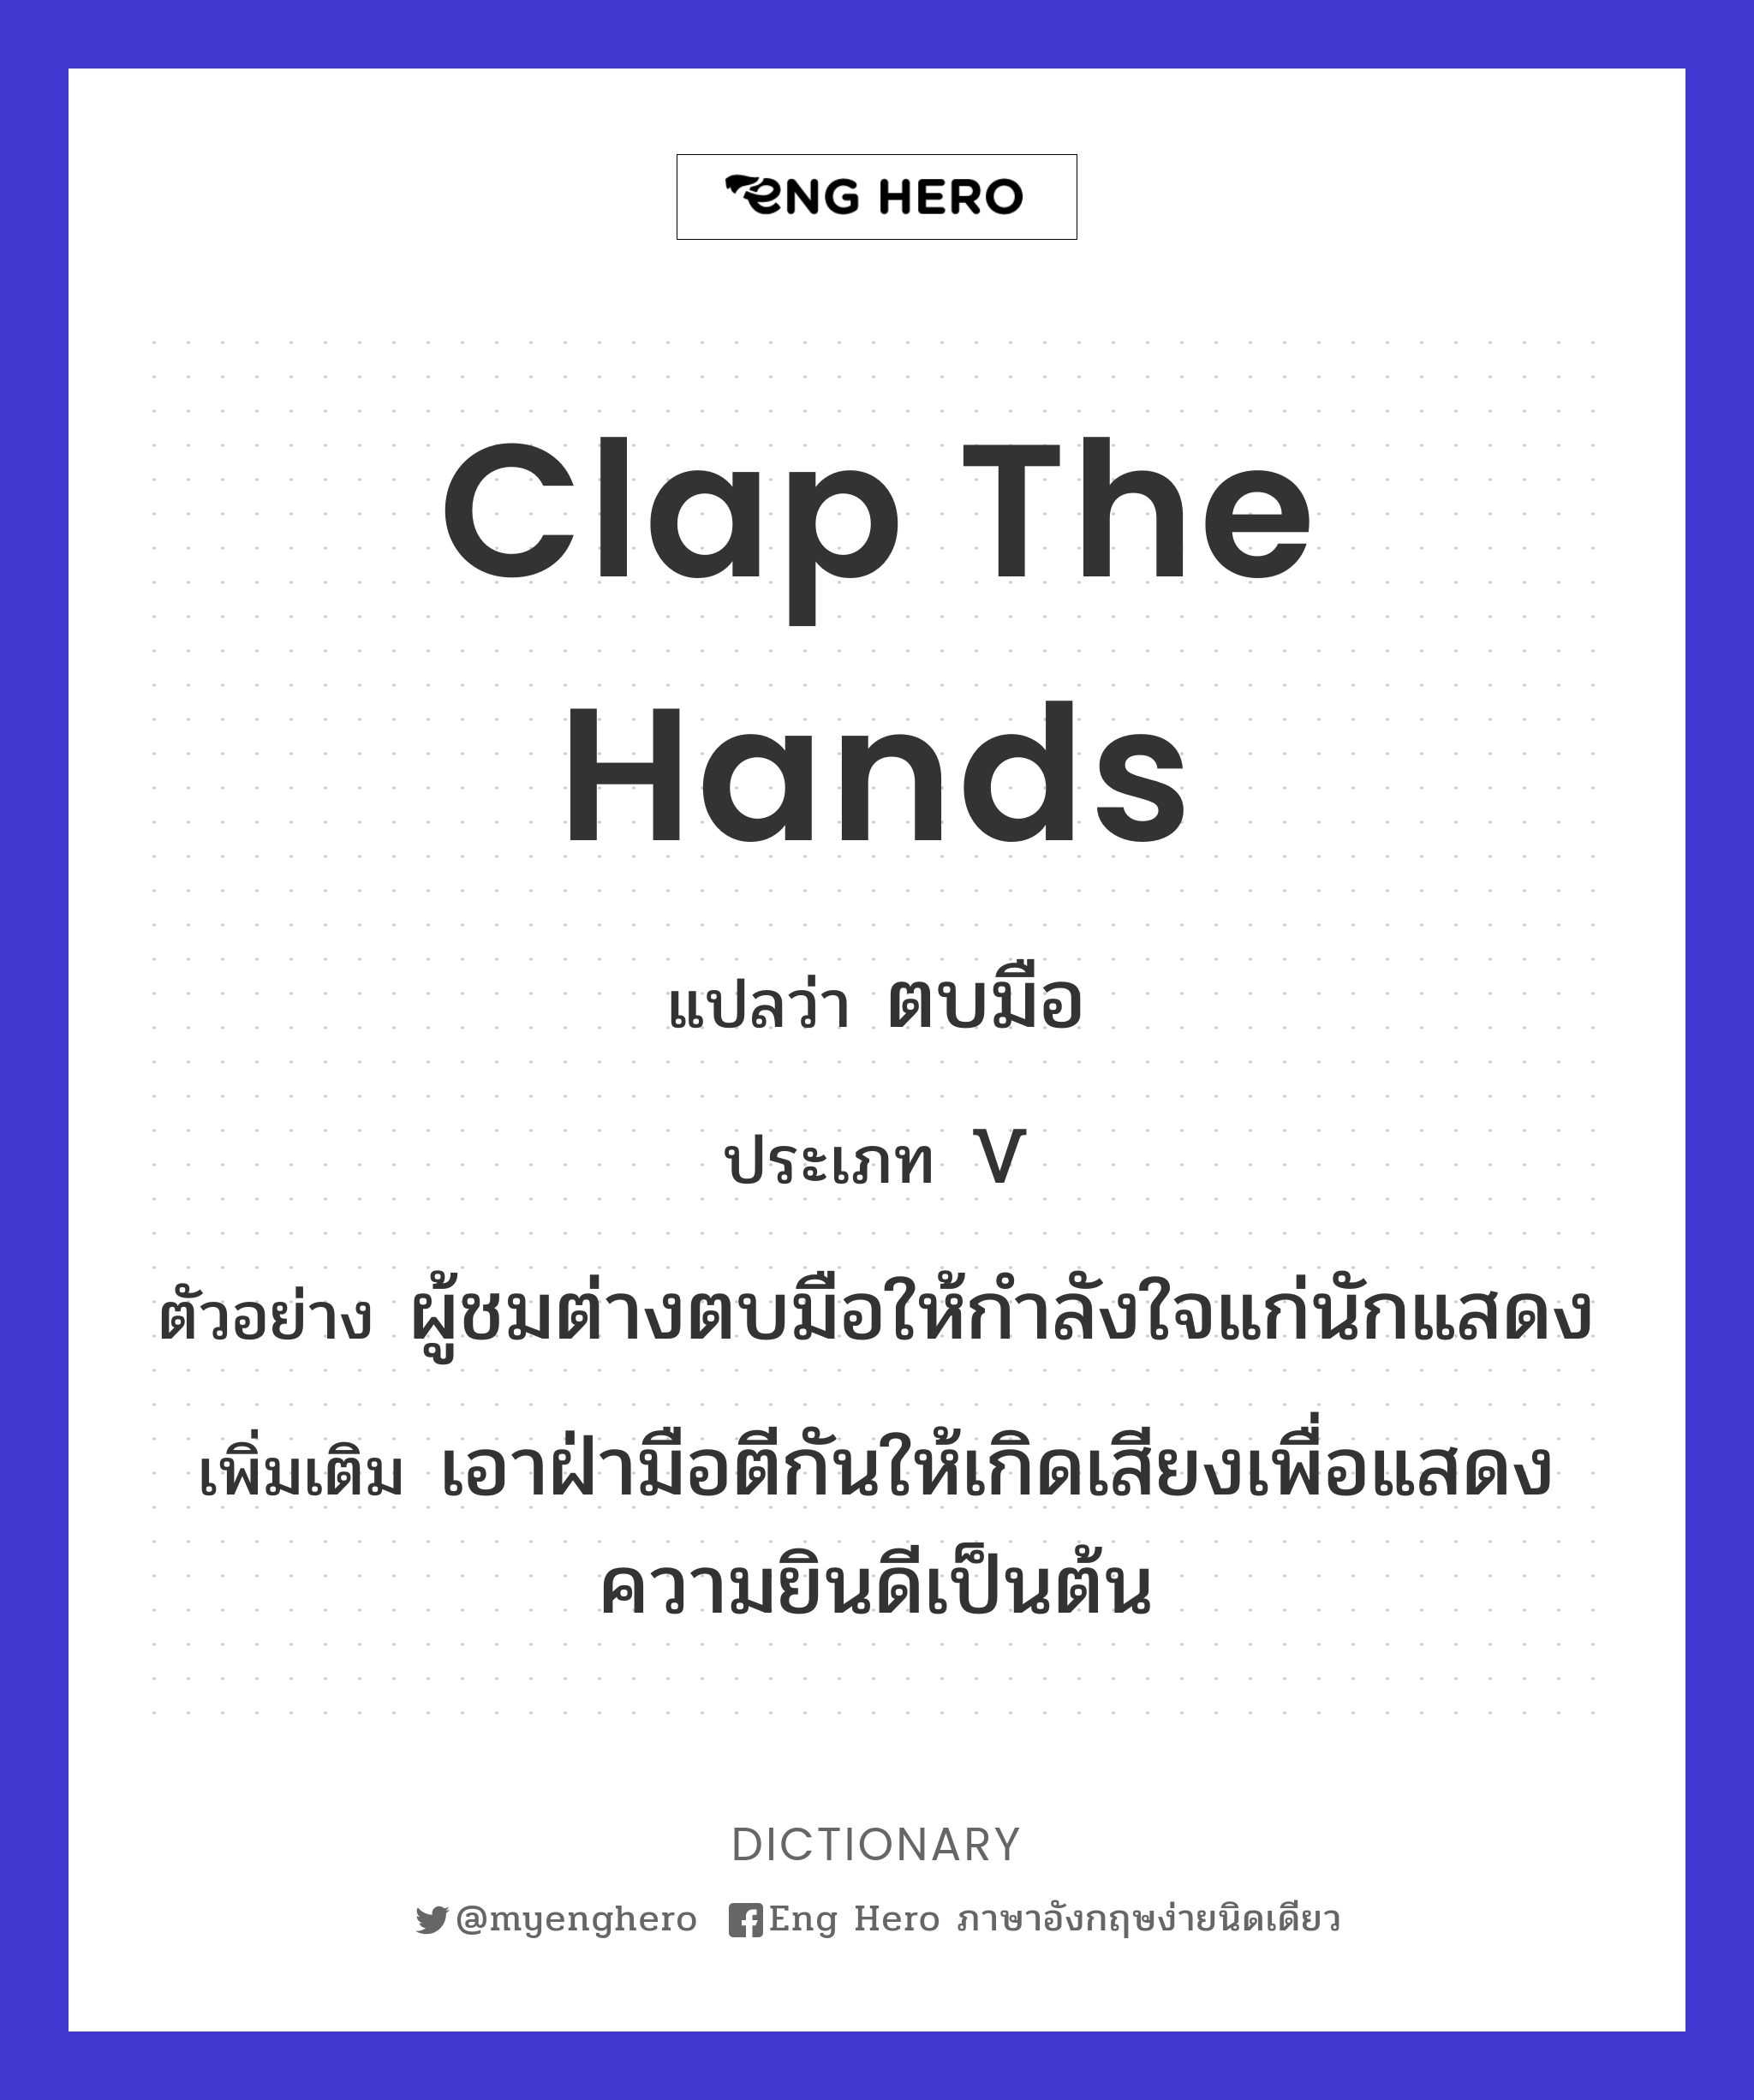 clap the hands